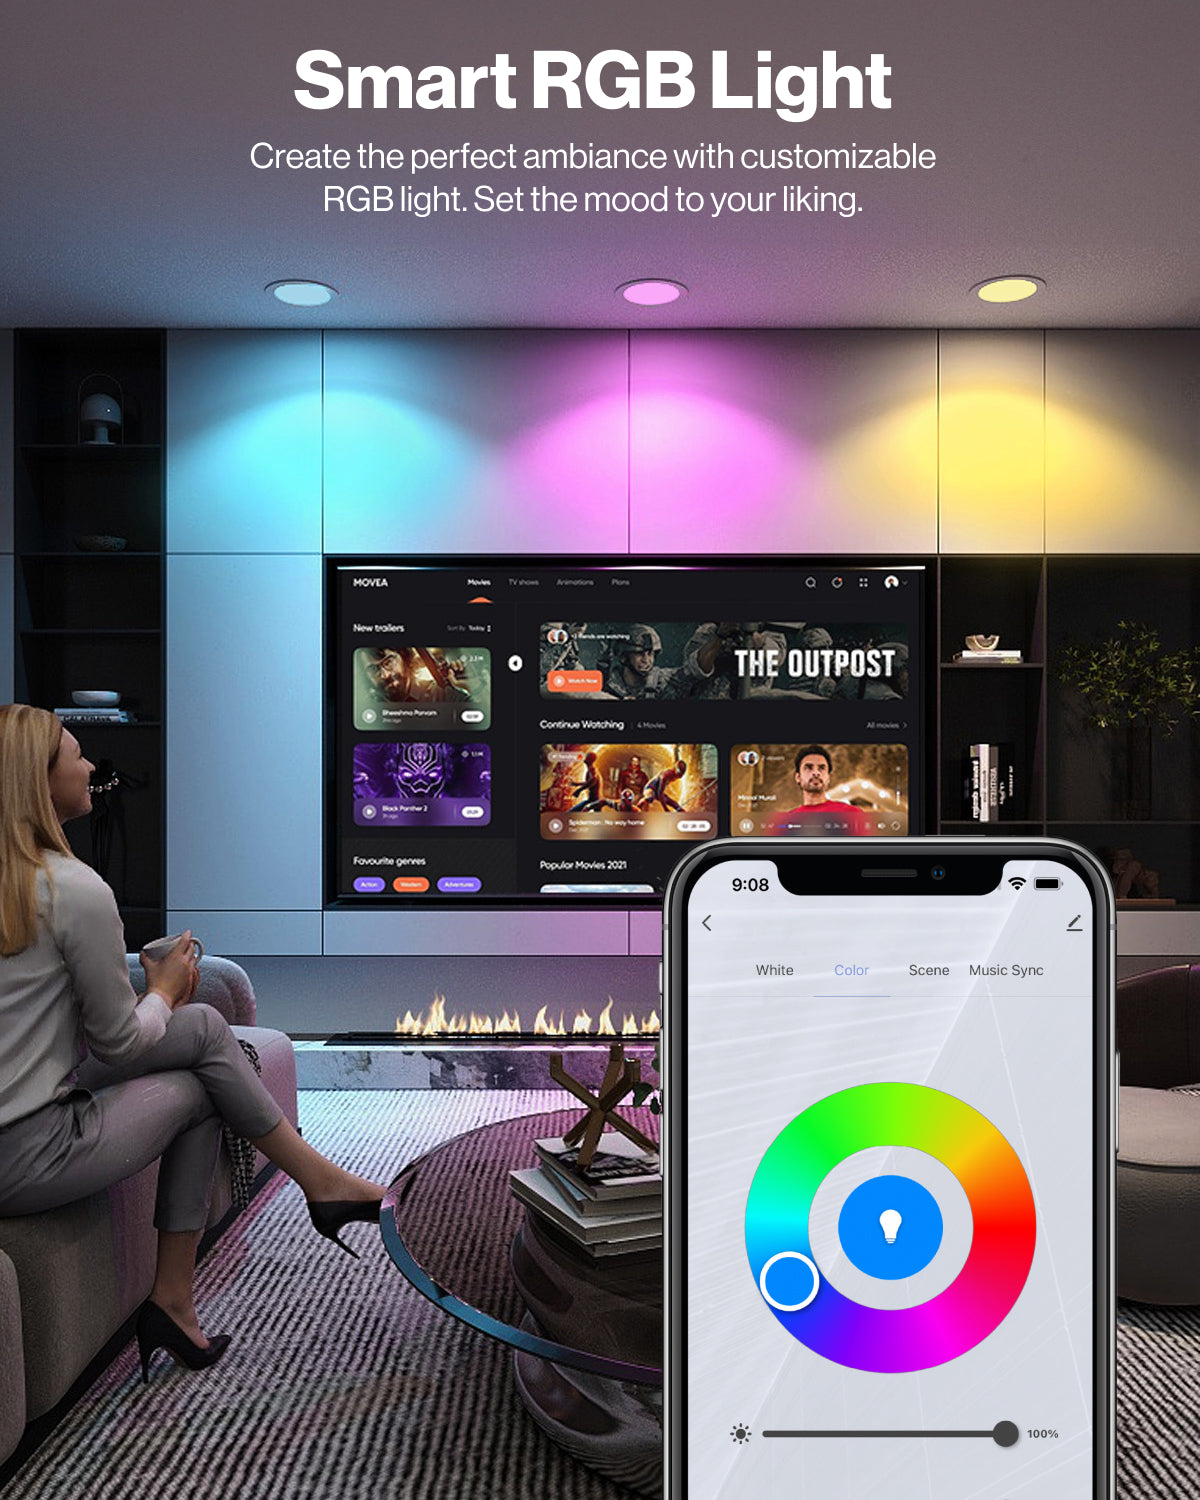 Tune the color temperature of the main light, or switch to the Night Light mode and change colors via the RGB rainbow color wheel on the Sunco app.